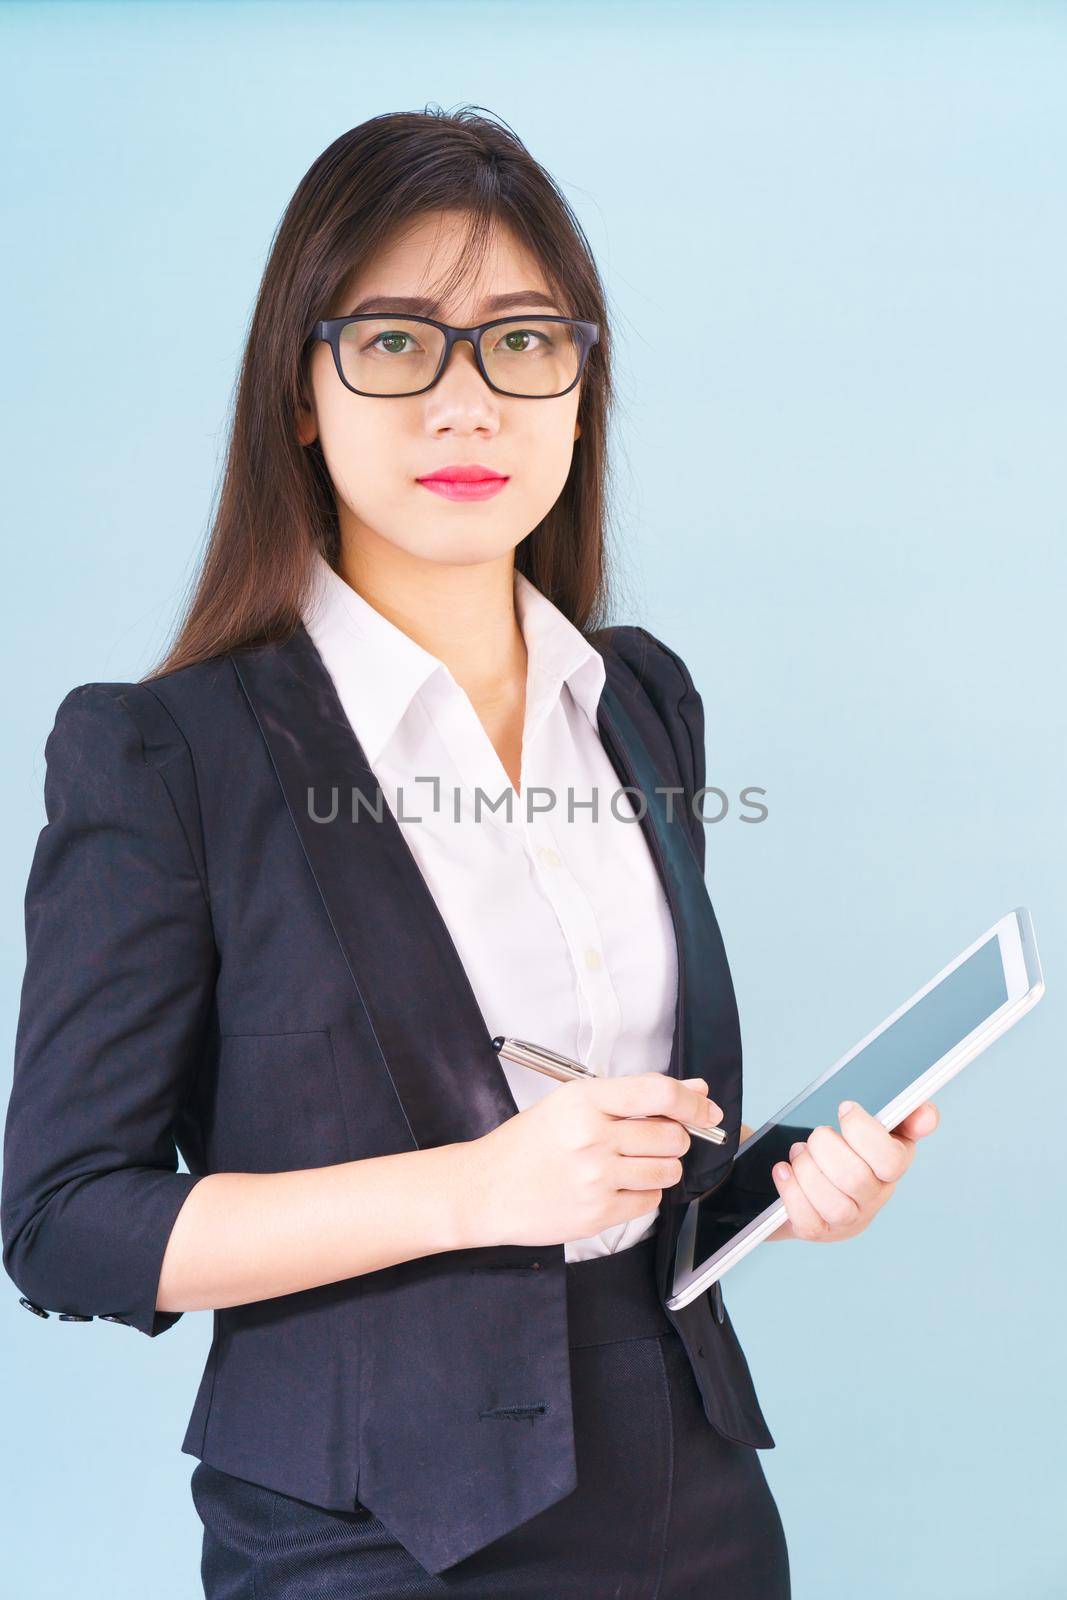 Young Asain women in suit standing using her digital tablet against blue background